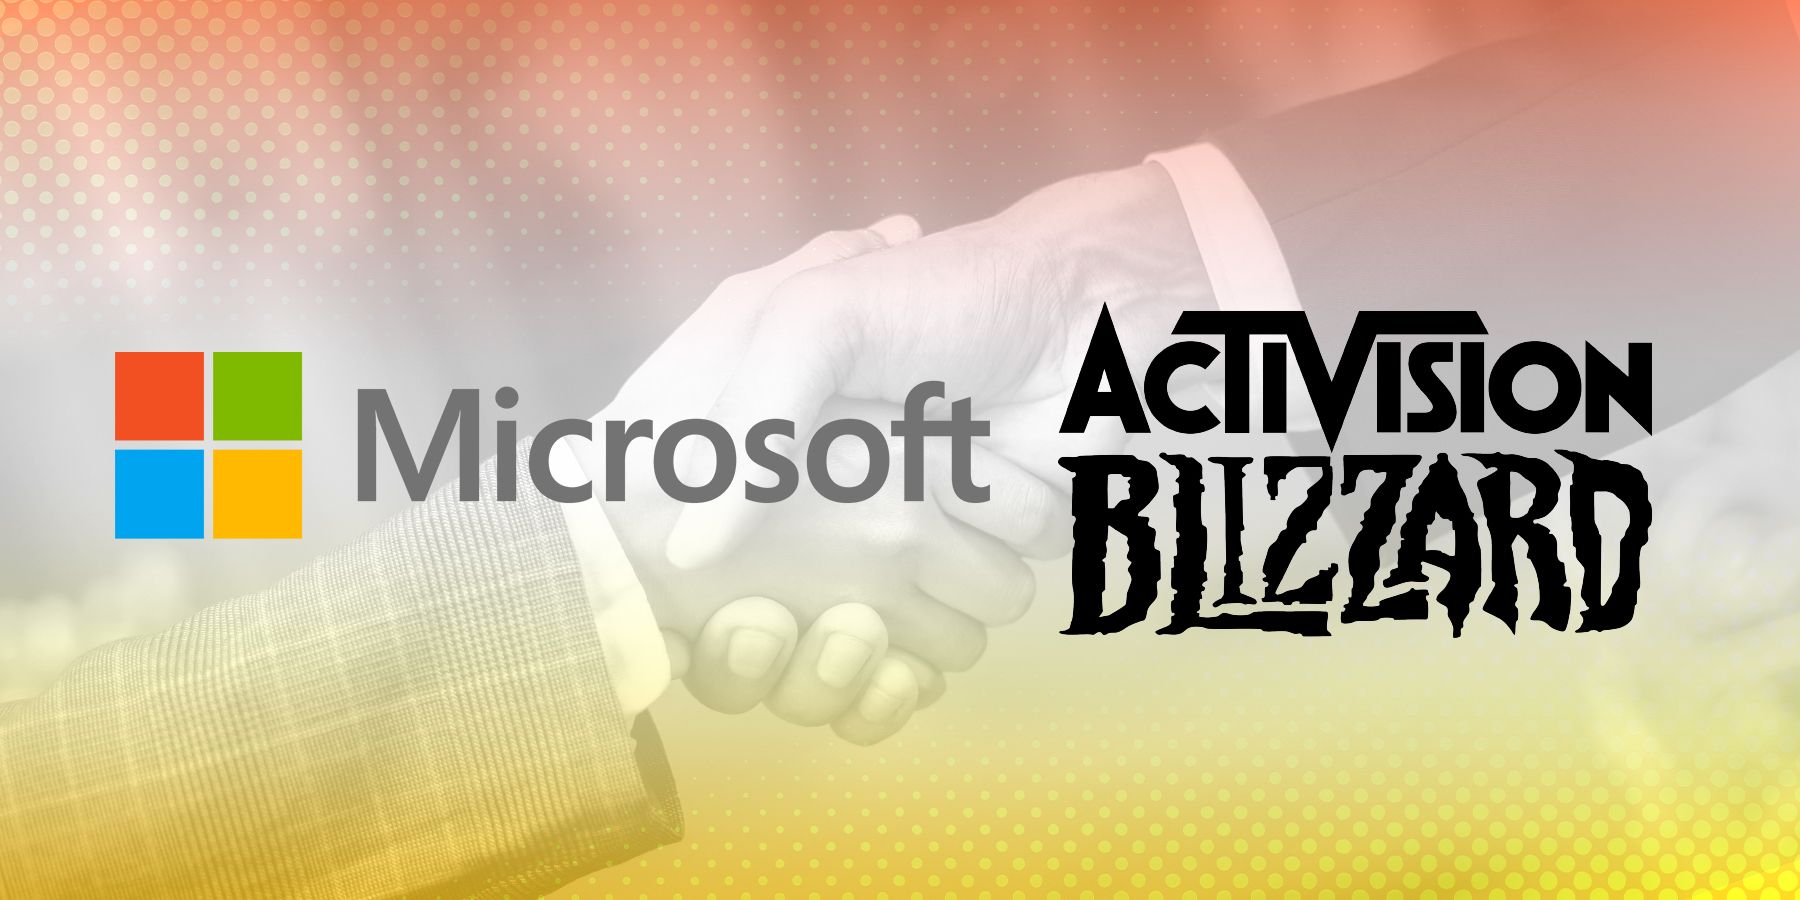 Microsoft/Activision Deal Gets Greenlight In U.S. Court Ruling